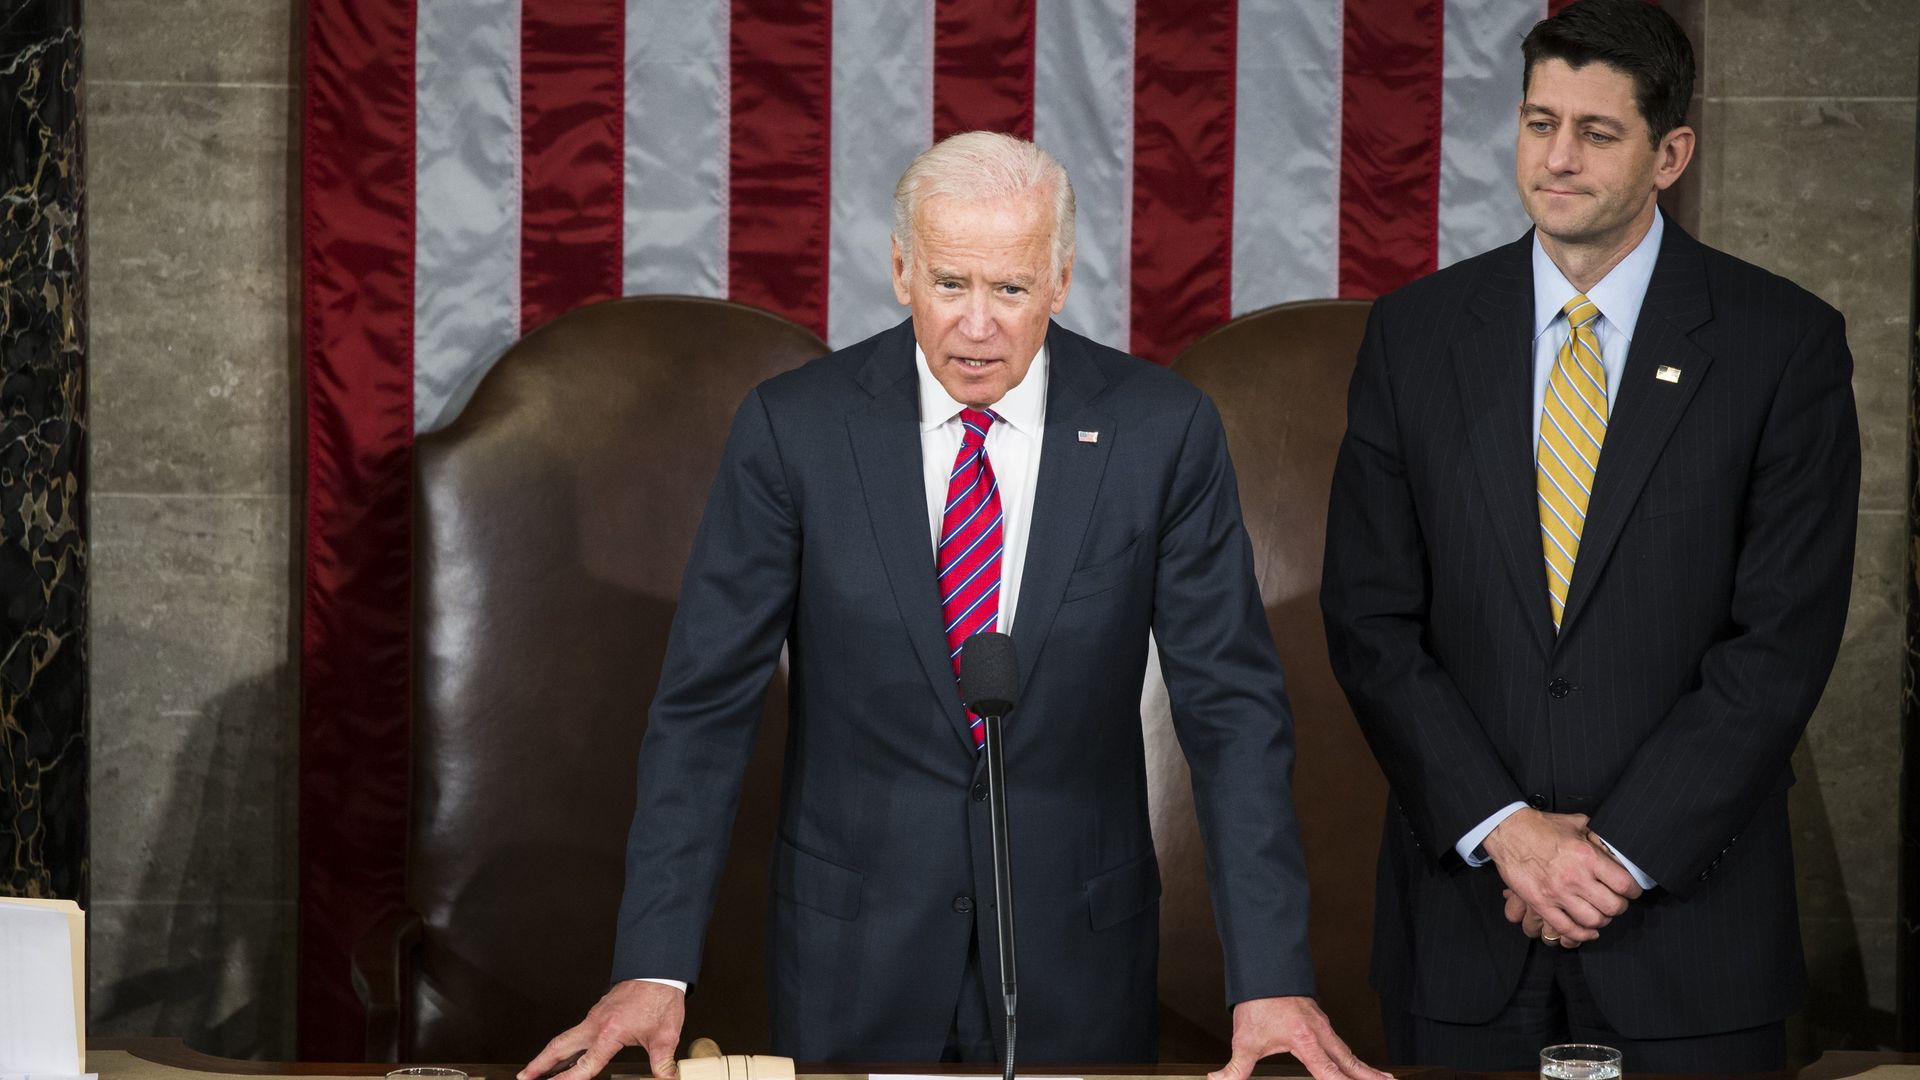 In this image, Biden speaks in the House while Paul Ryan stands next to him.